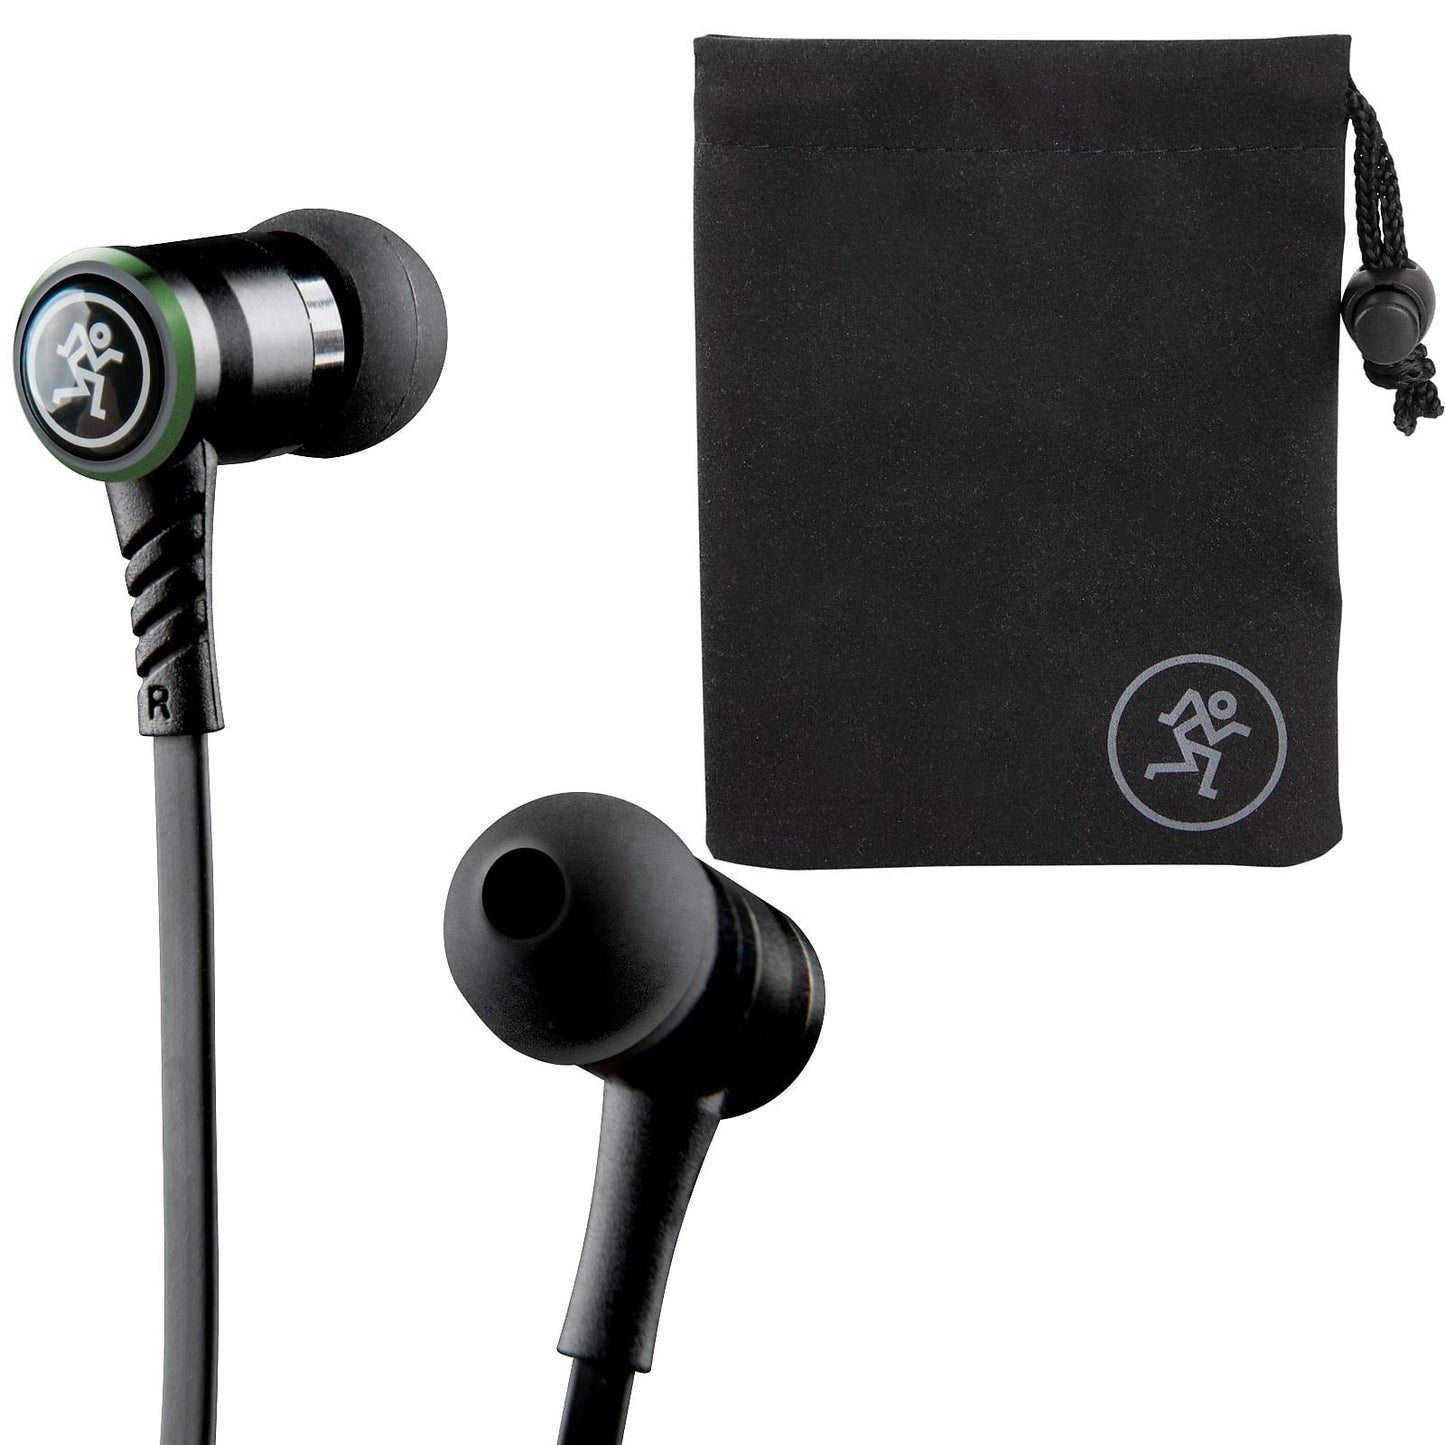 Mackie High Performance Earphones With Mic Control